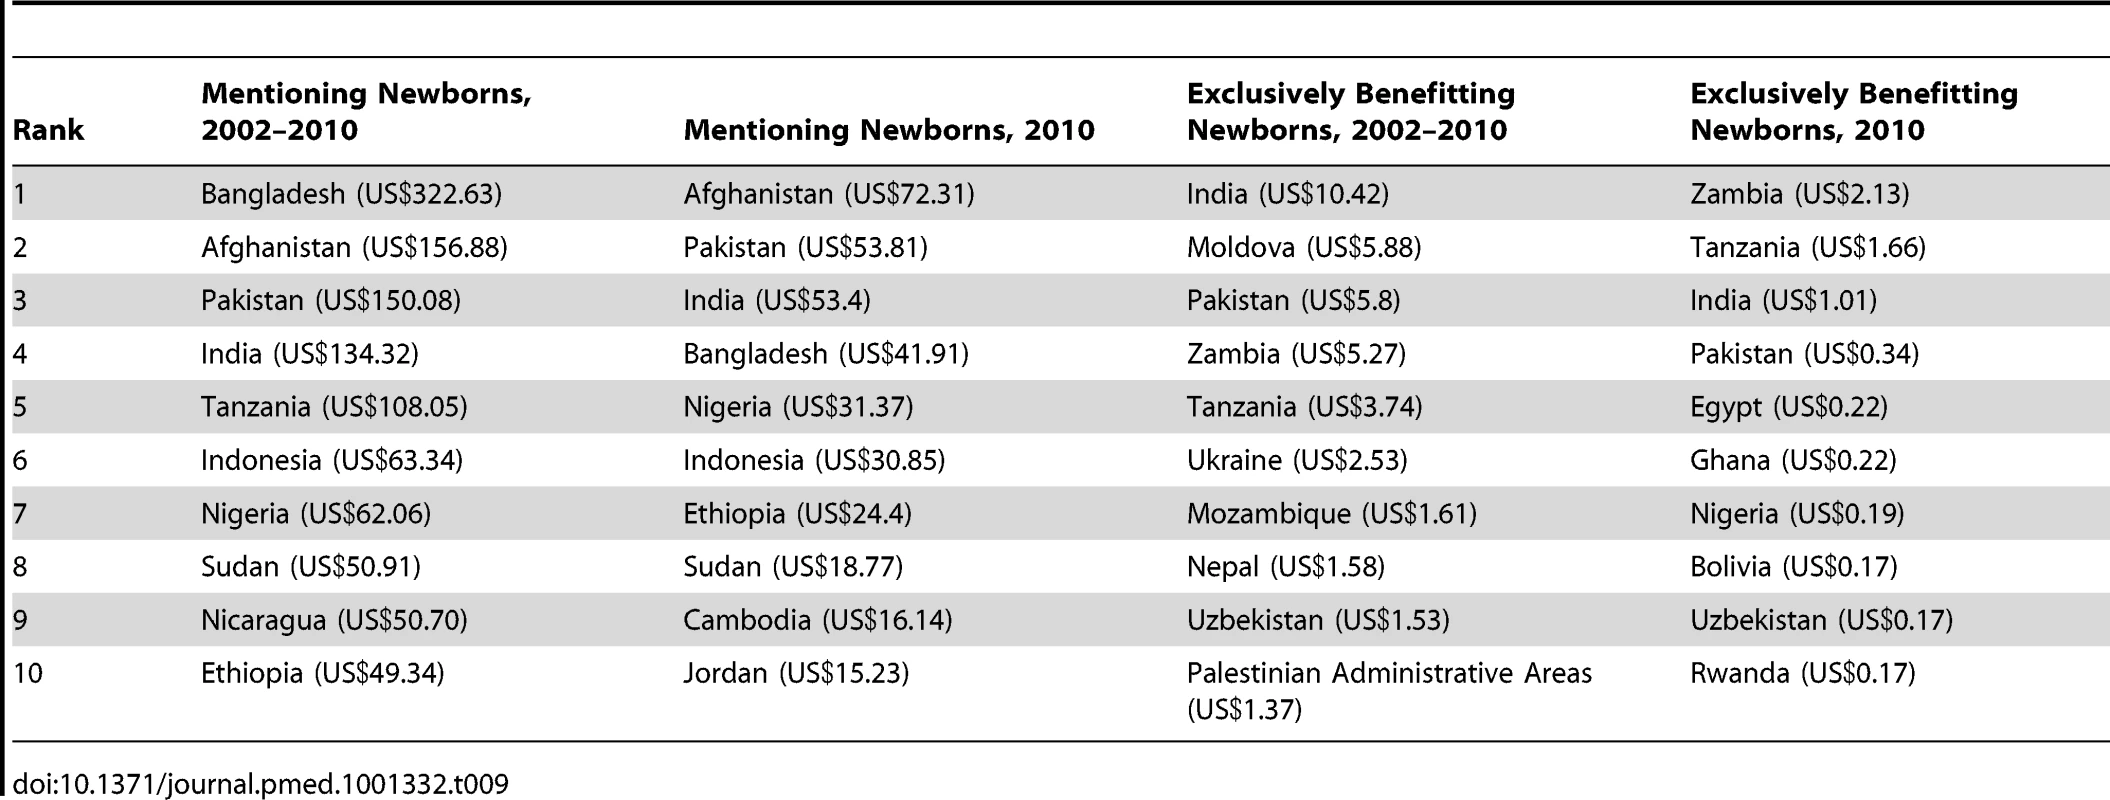 The leading country recipients of total aid mentioning and exclusively benefitting newborns over the period 2002–2010 and in 2010 (constant 2010 US$, millions).